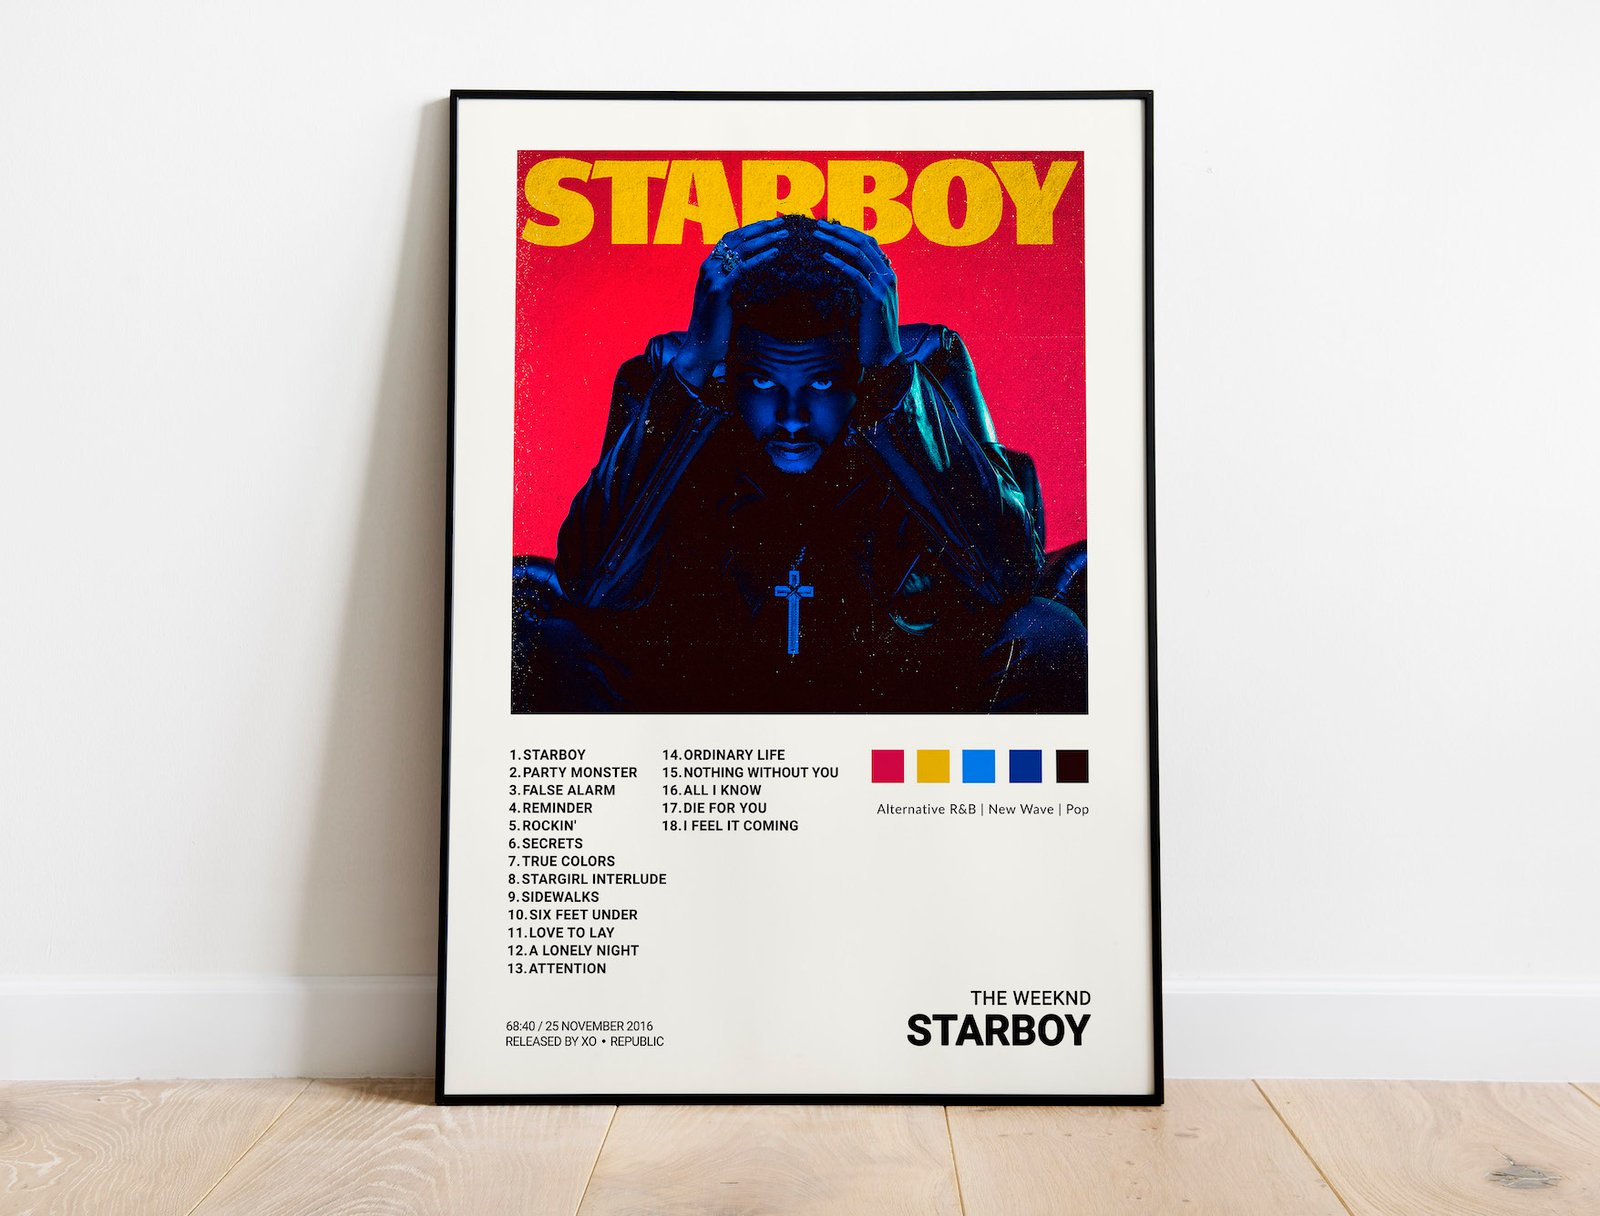 the weeknd starboy album in stores